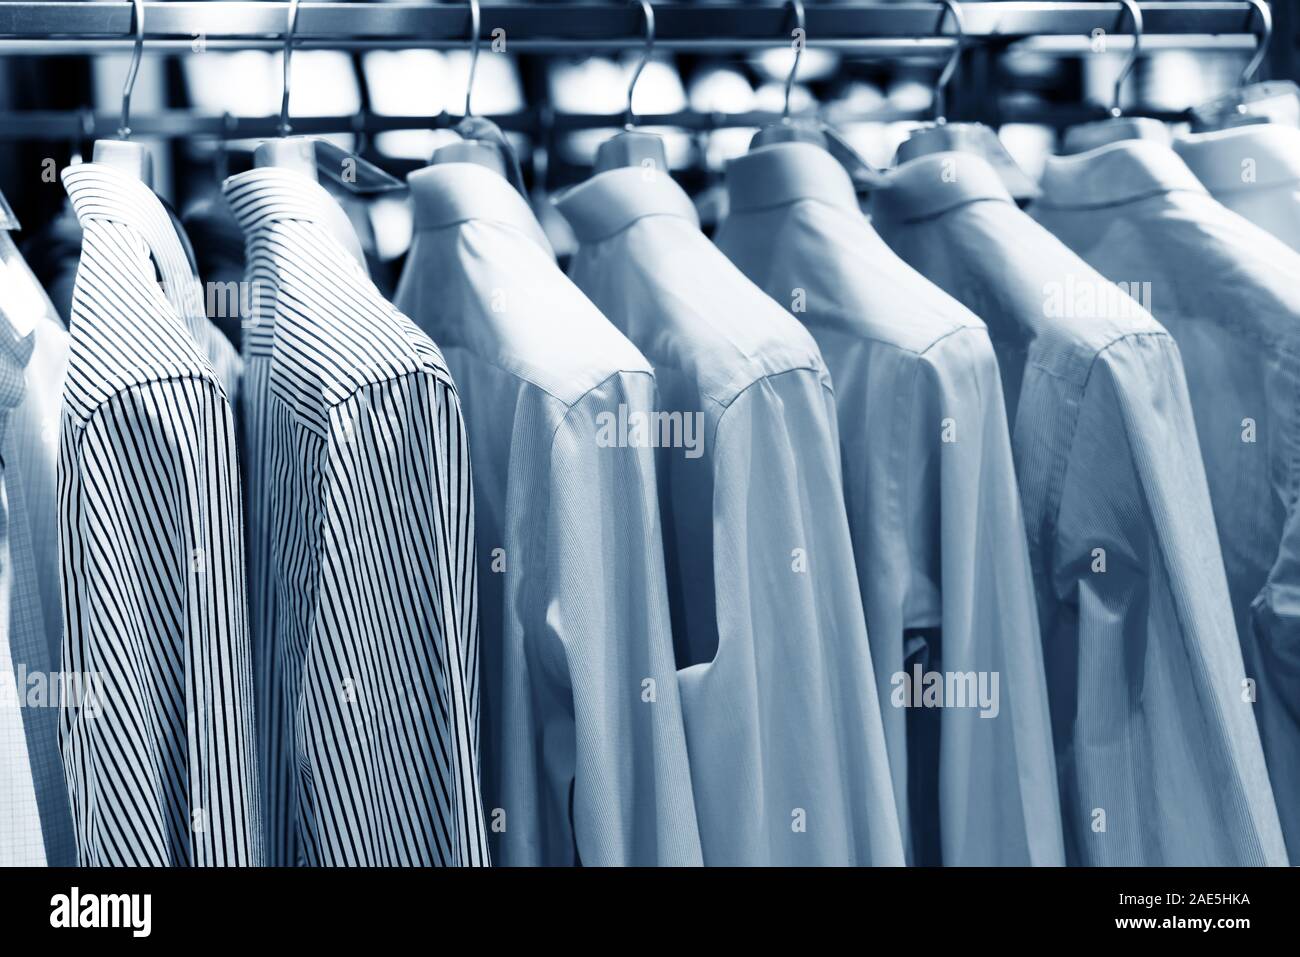 Men suits hanging in a clothing store. Stock Photo